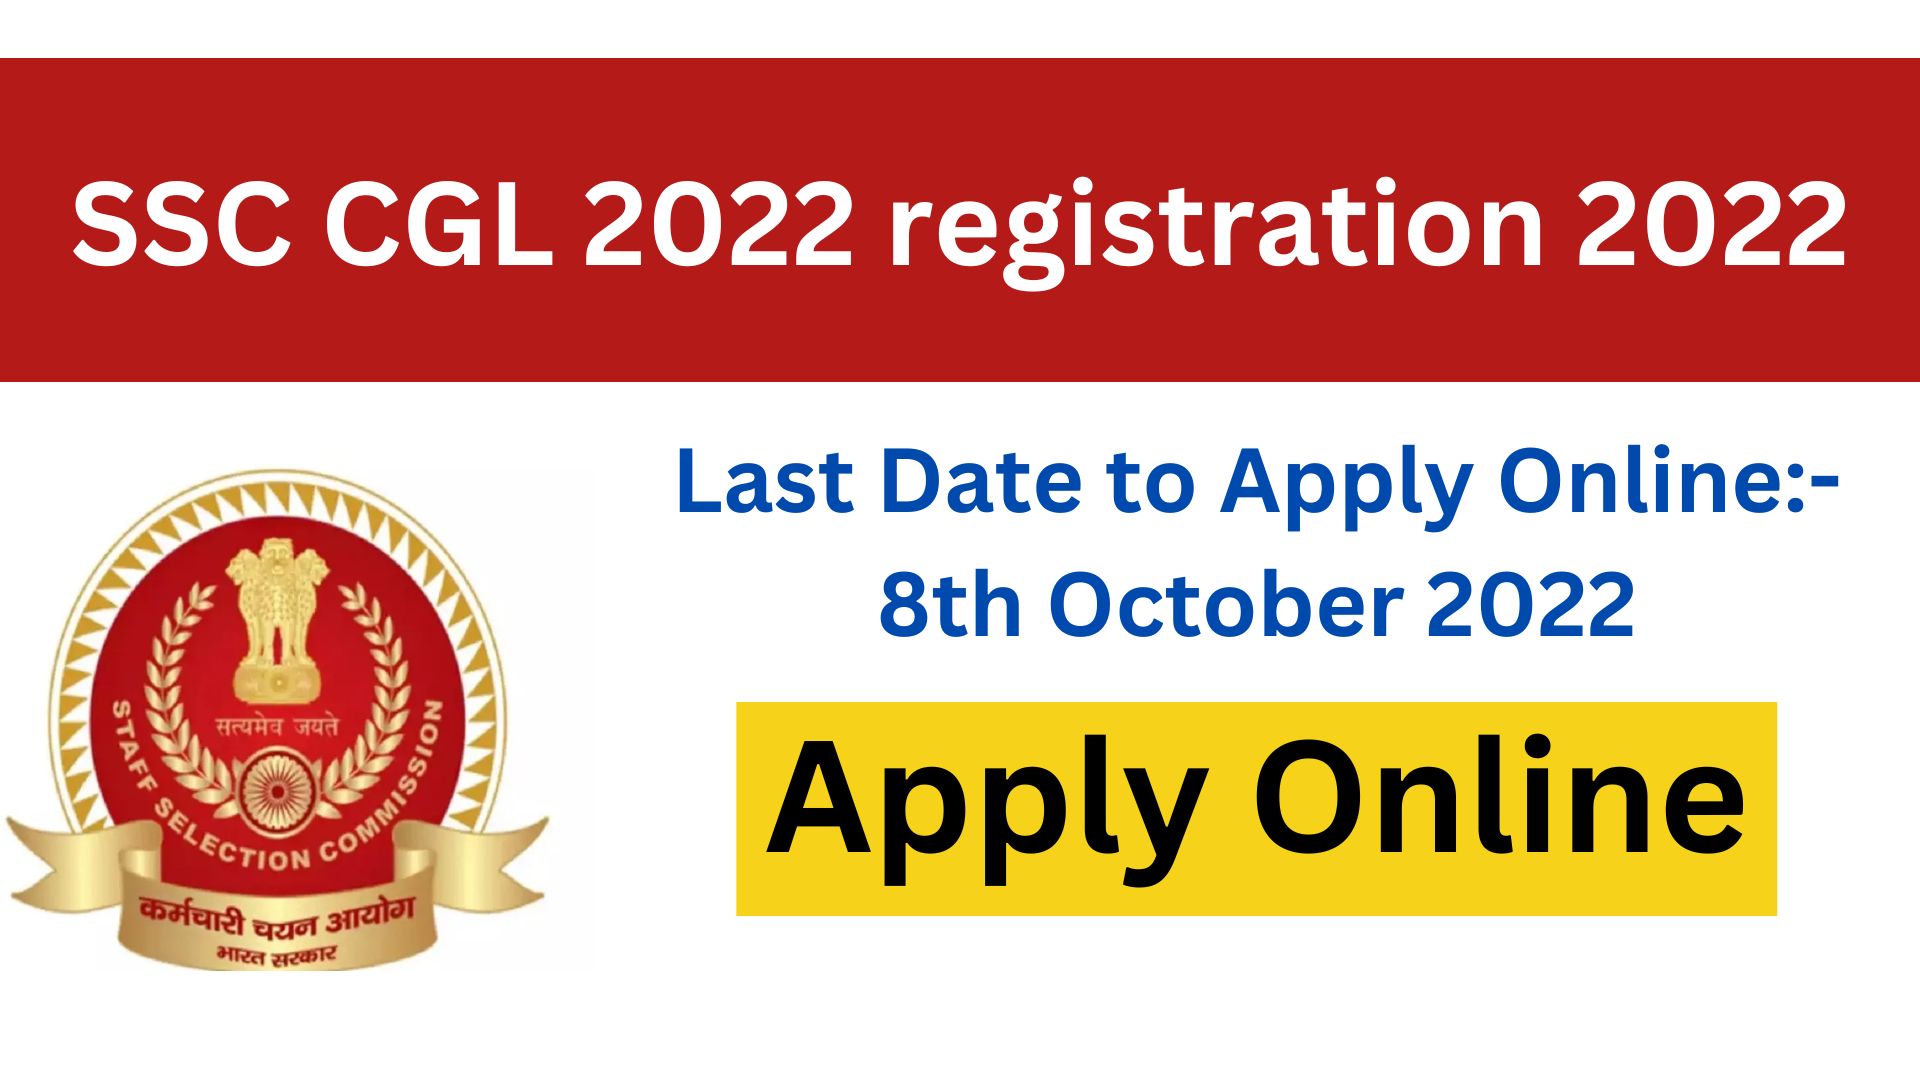 SSC CGL 2022 registration ends today, apply on 